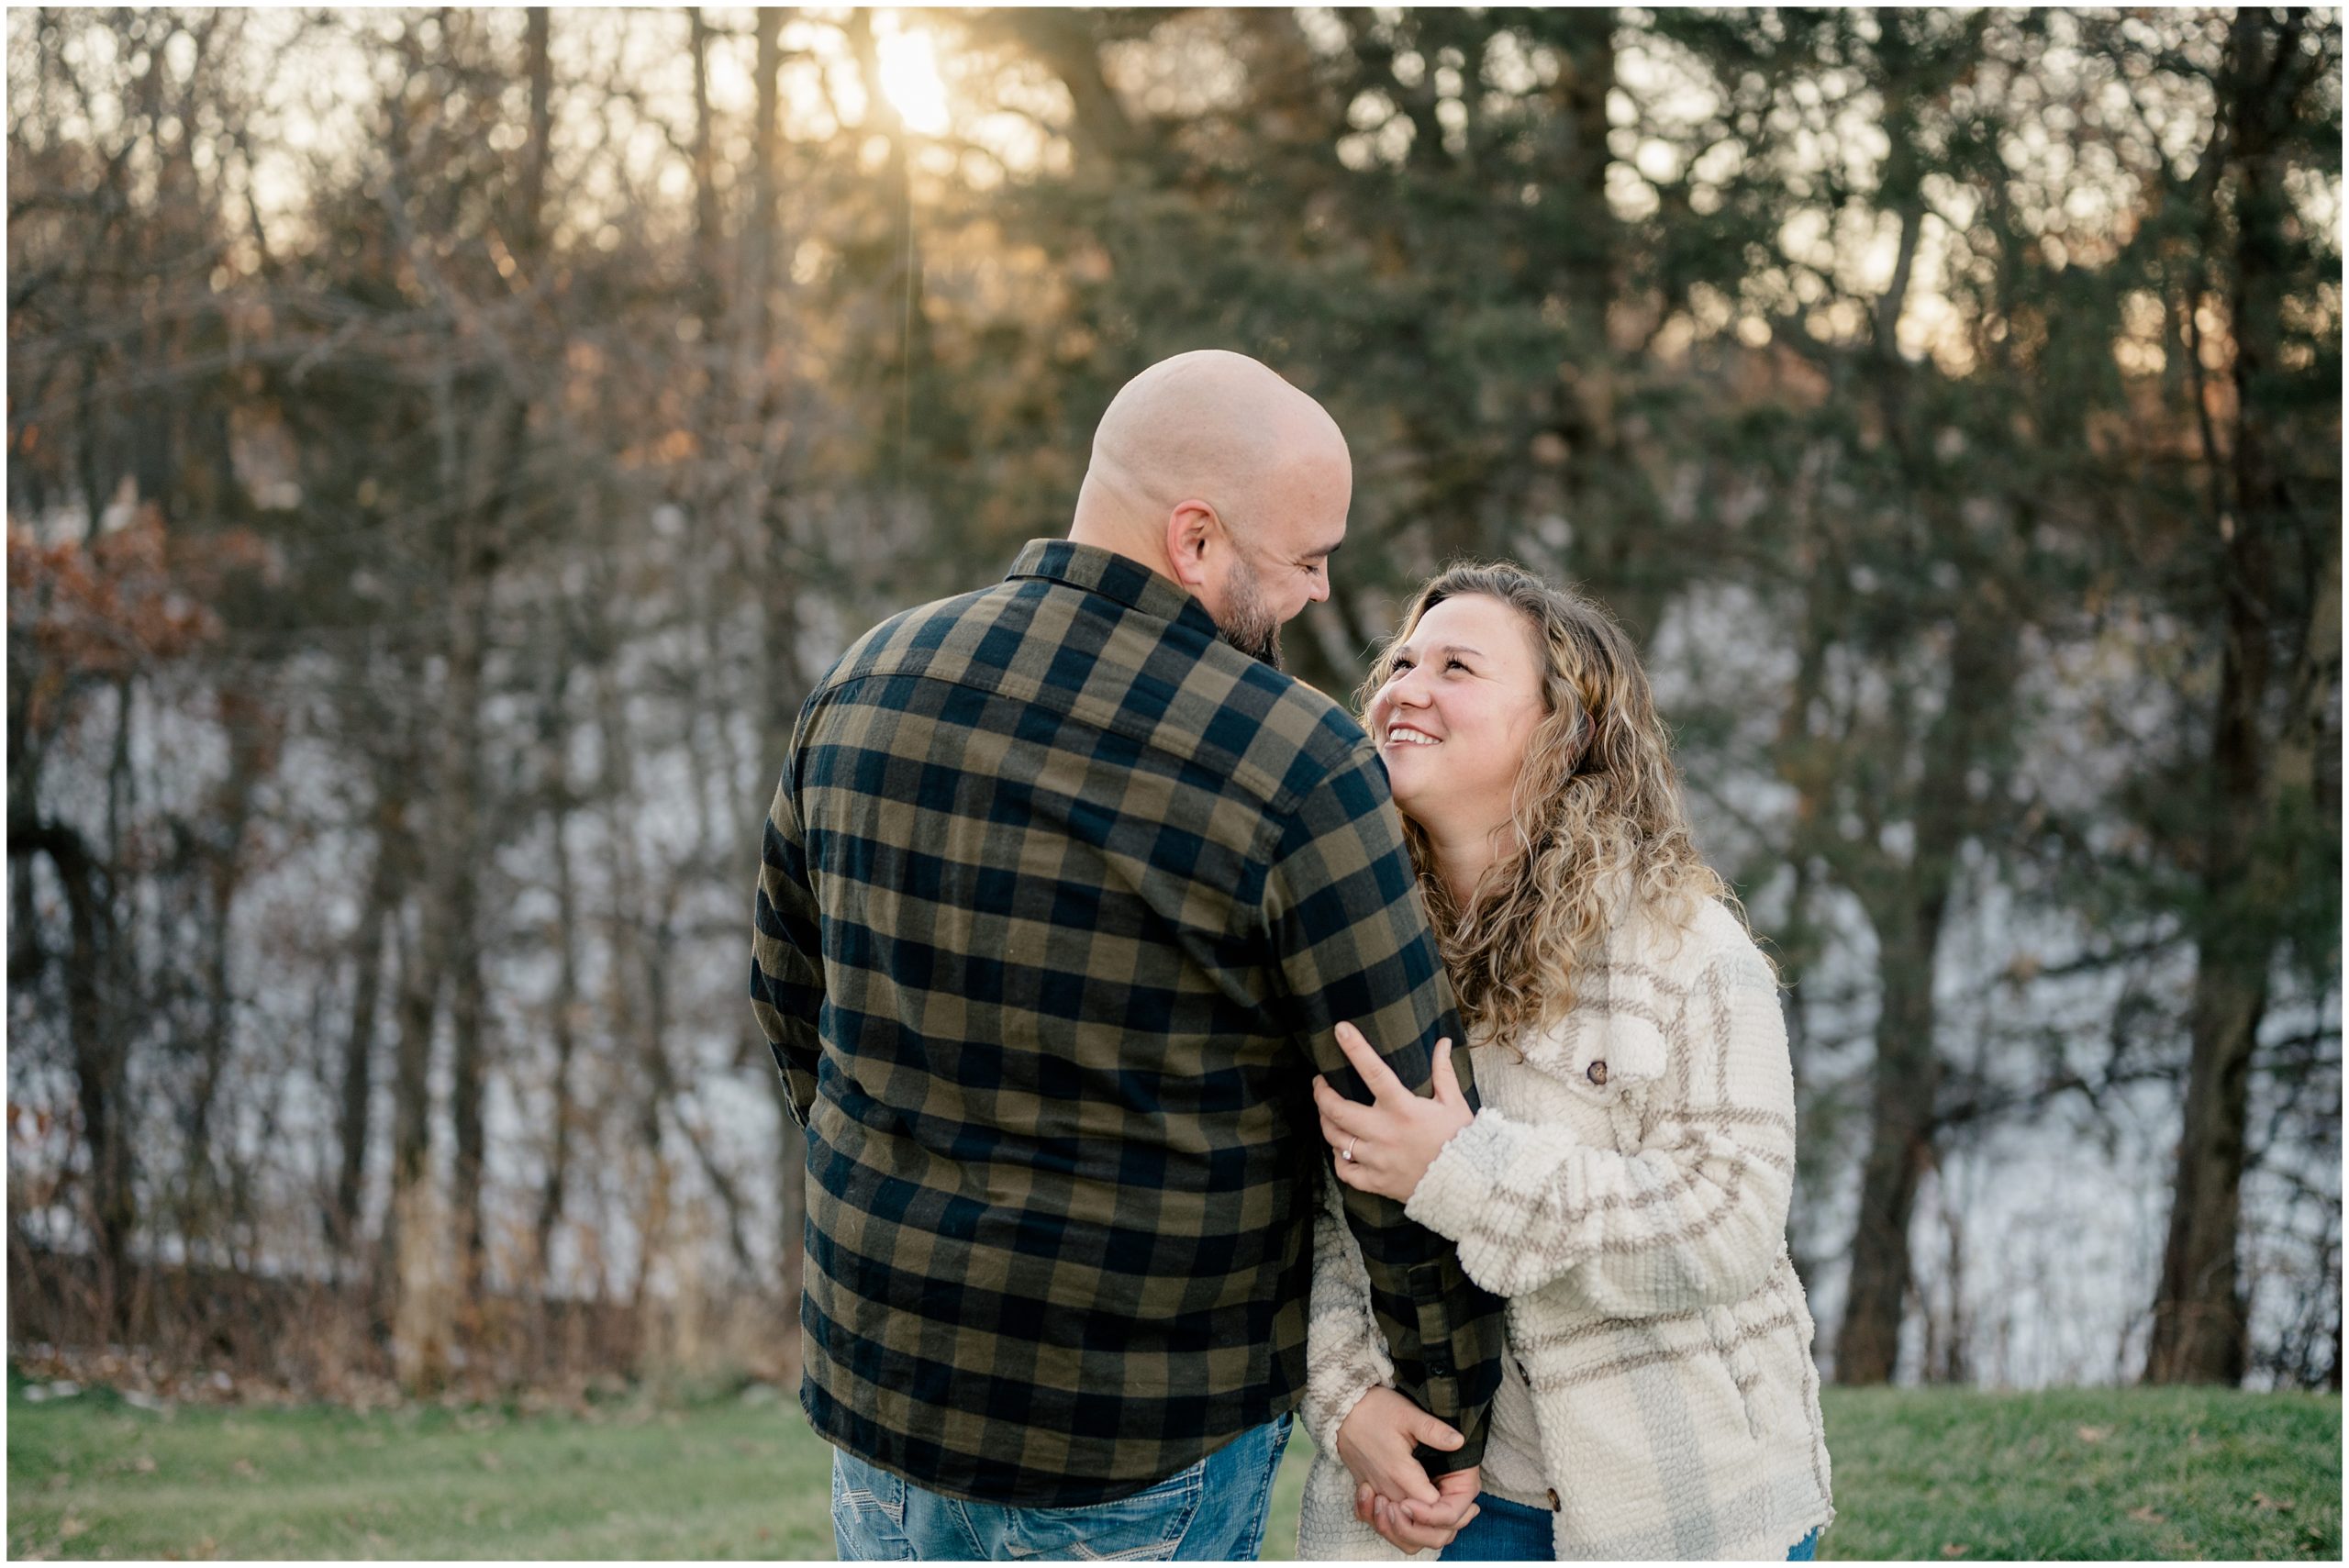 Dreamy sunset for a golf course engagement session